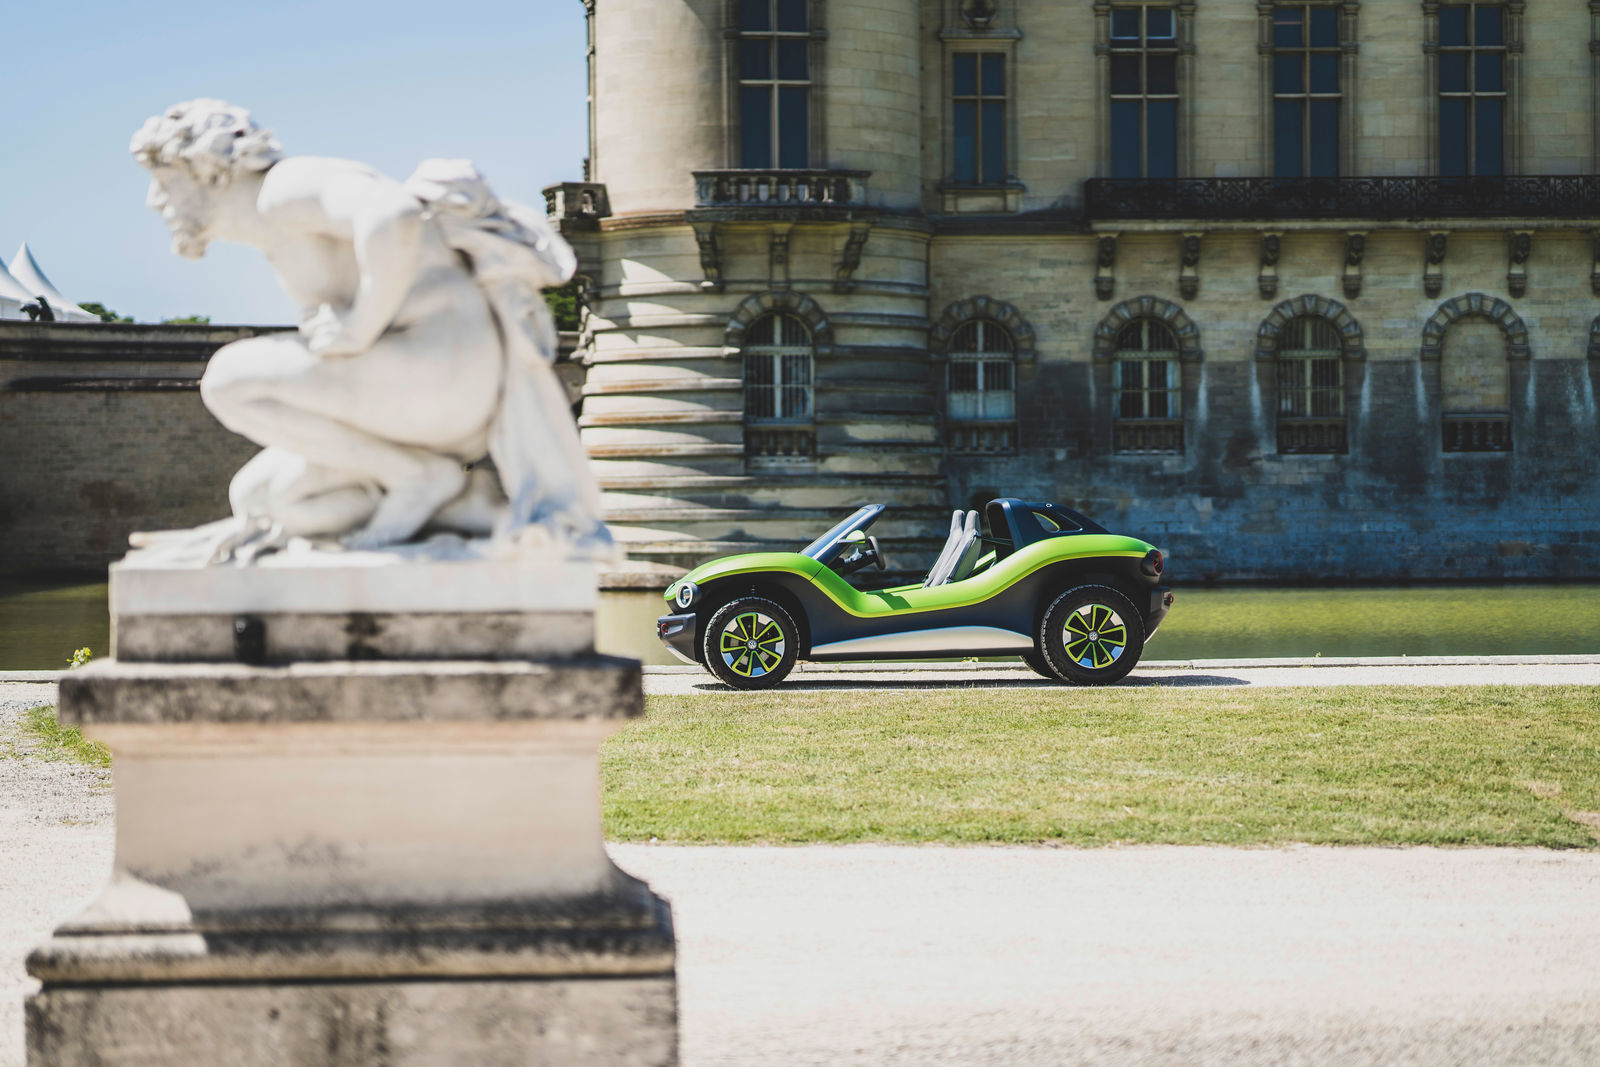 ID. BUGGY at Concours d’Elegance in Chantilly